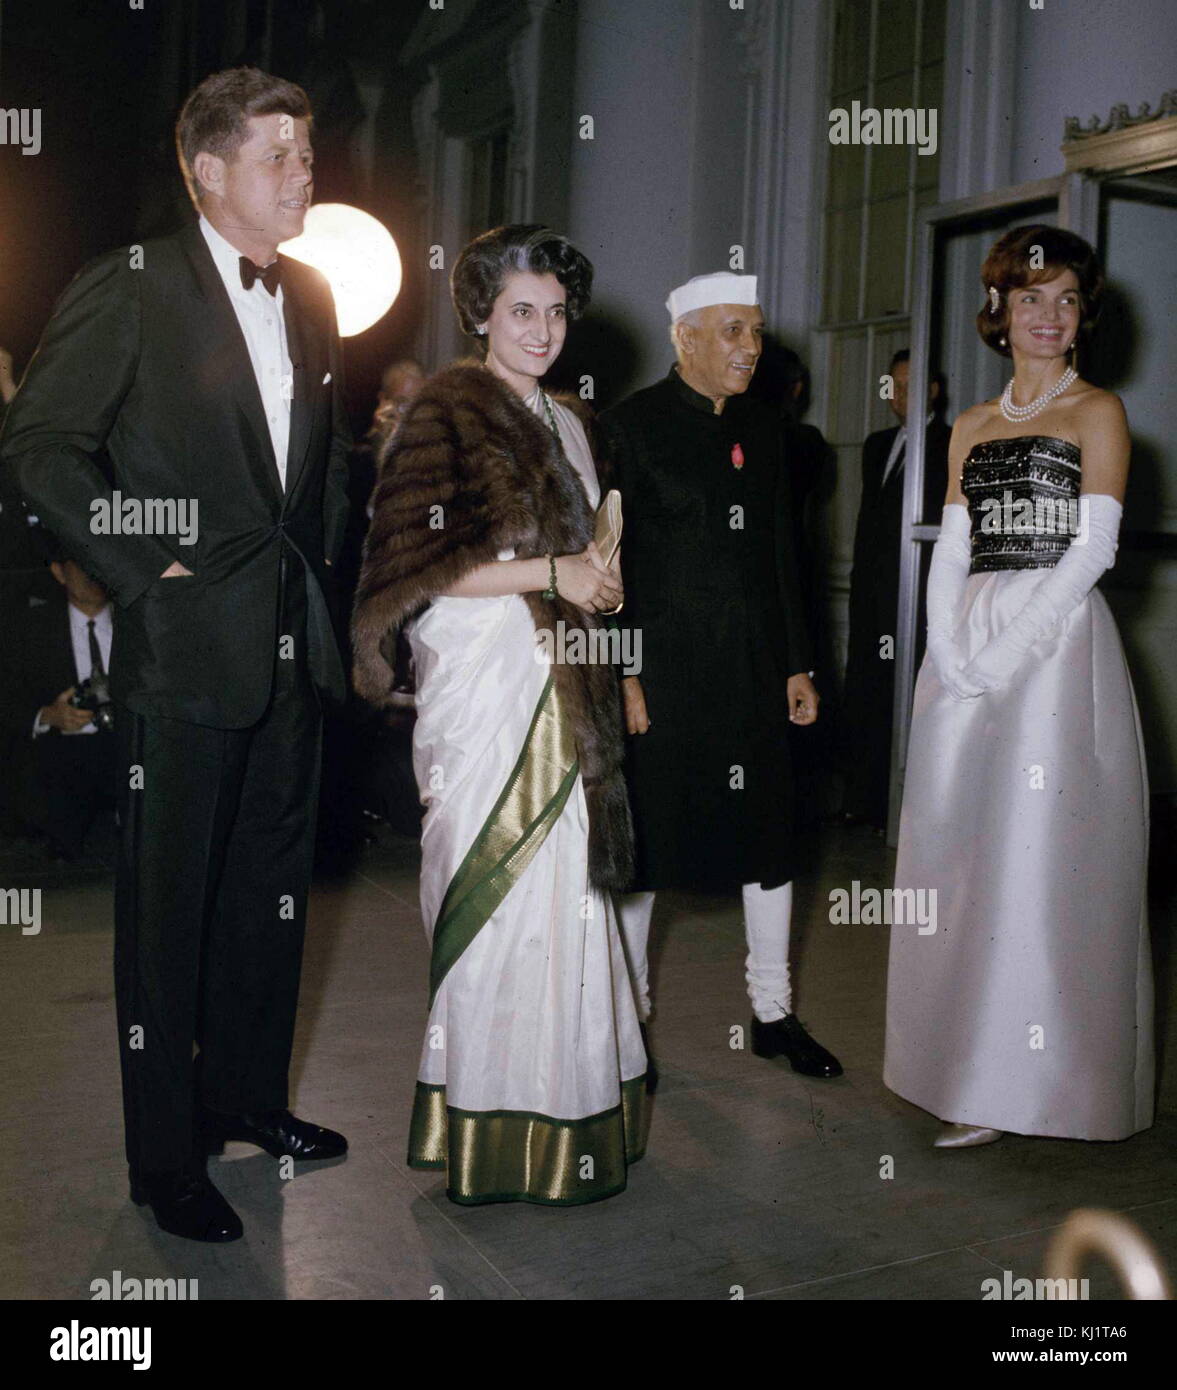 President John Kennedy with Jawaharlal Nehru (1889 –1964) first Prime Minister of India, Washington DC 1961. Jacquie Kennedy and Indira Gandhi look on Stock Photo